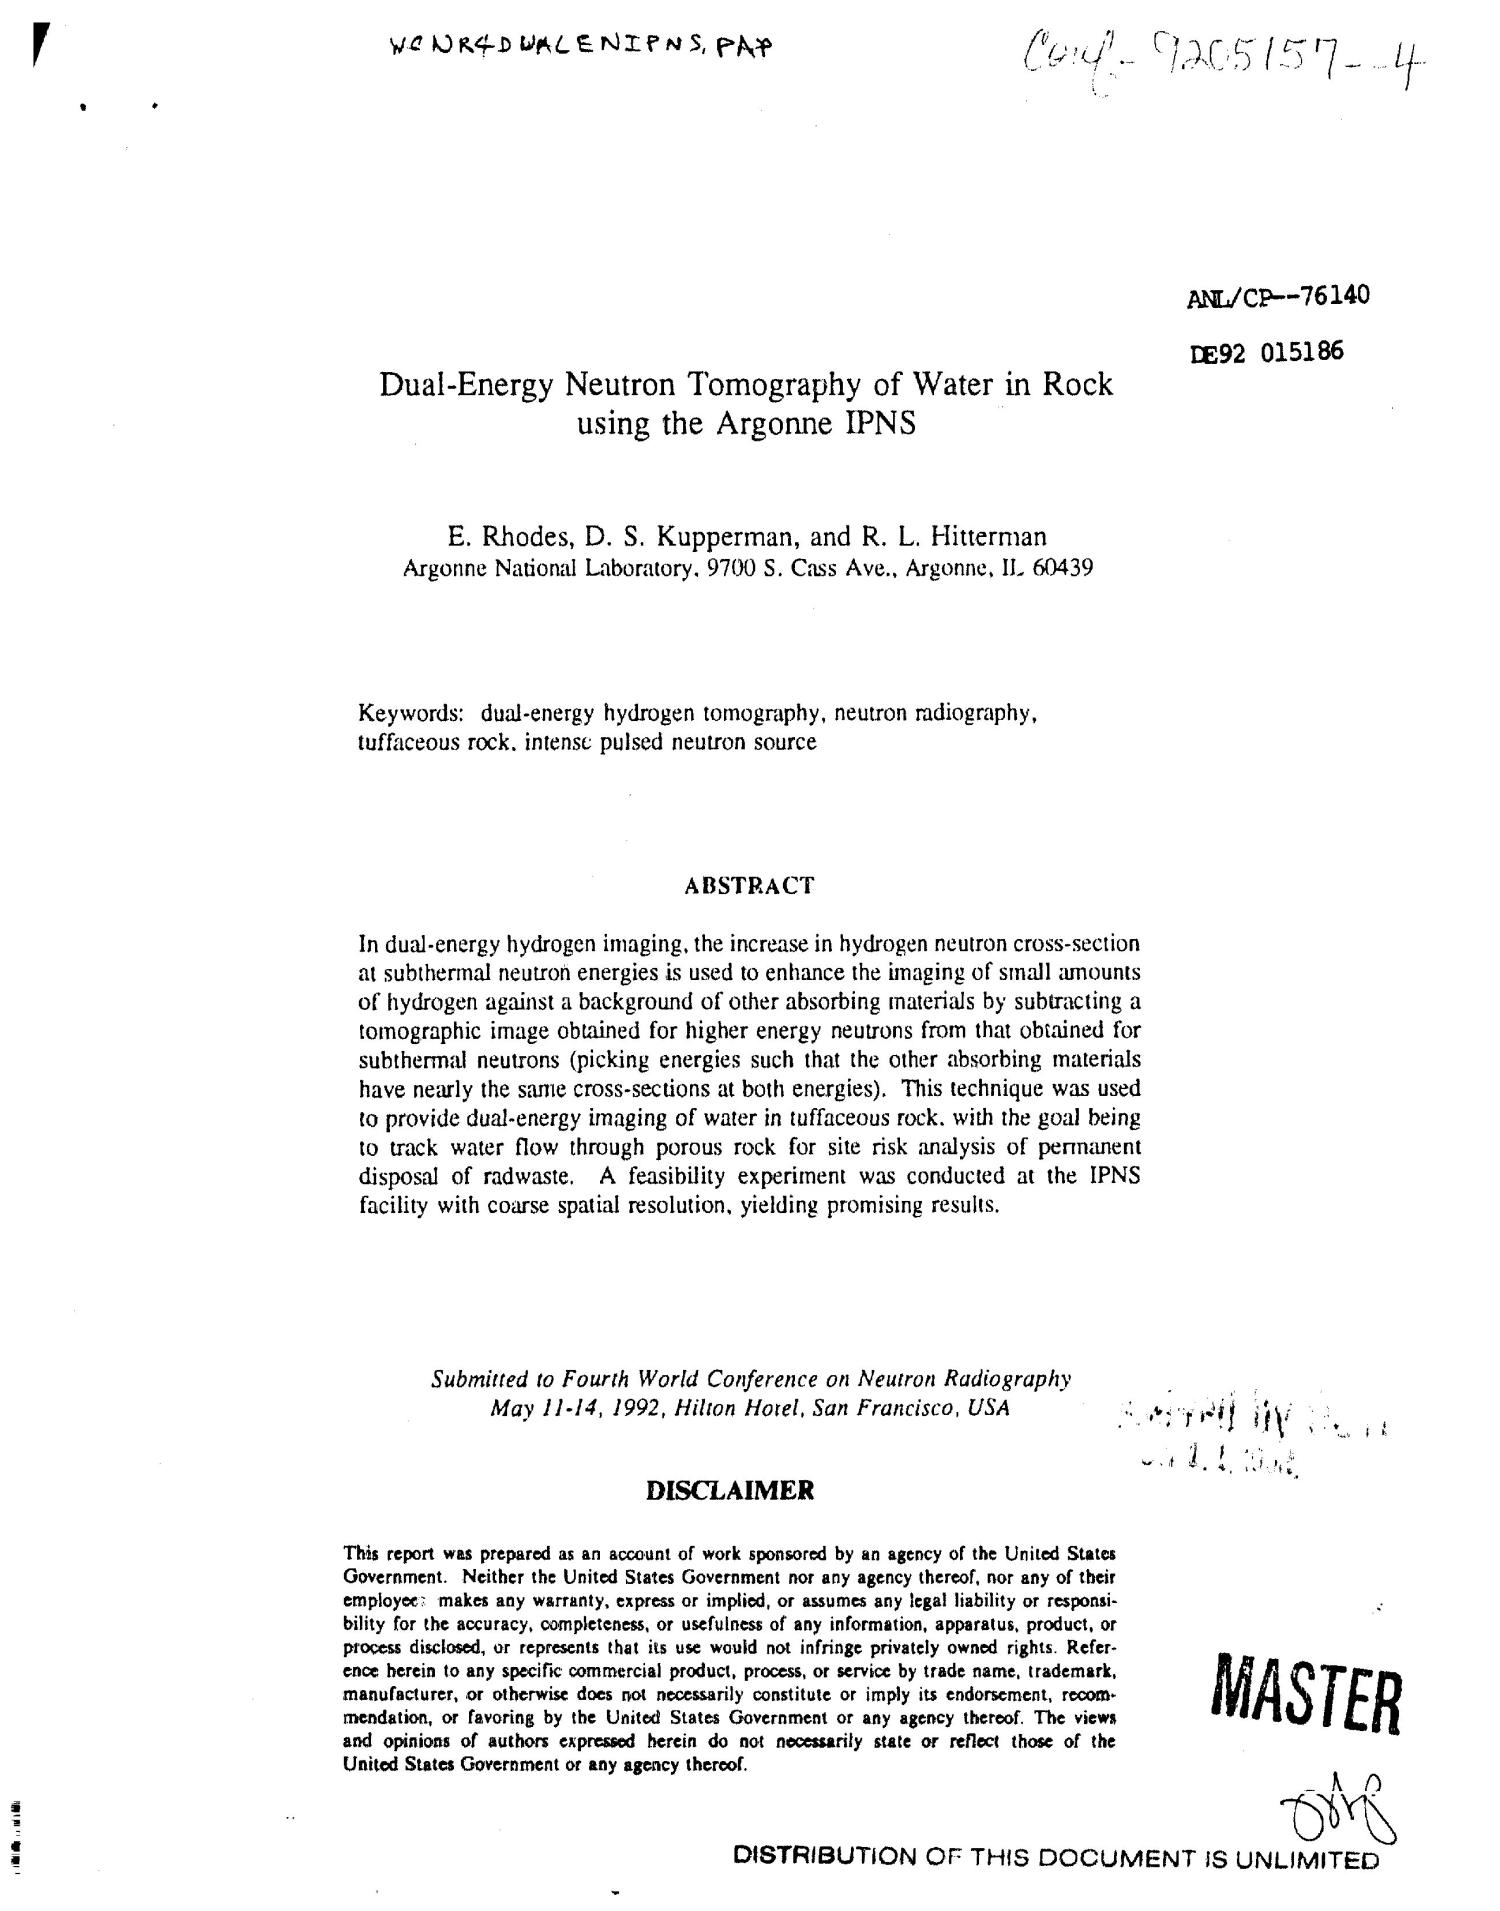 Dual-energy neutron tomography of water in rock using the Argonne IPNS
                                                
                                                    [Sequence #]: 1 of 8
                                                